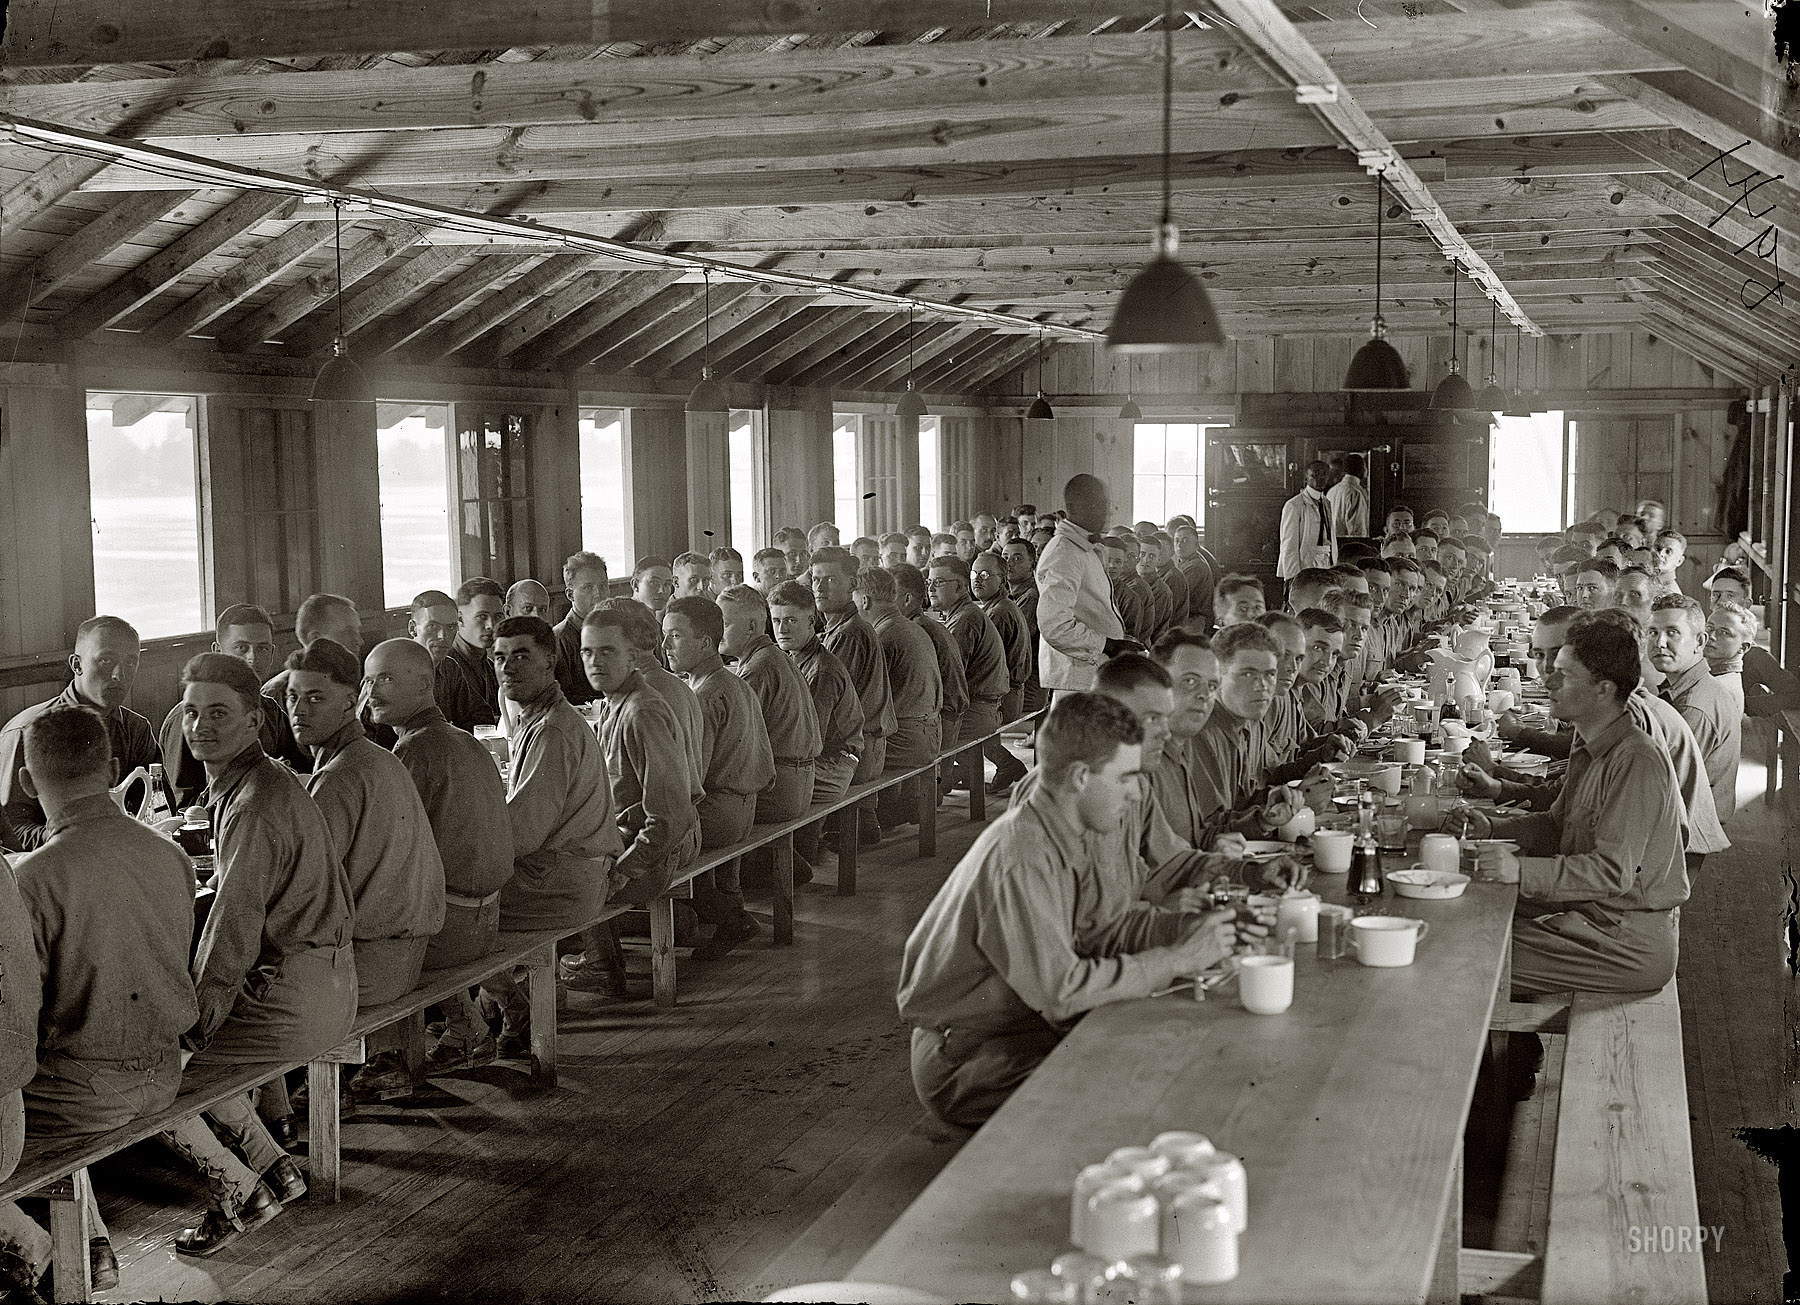 Arlington, Virginia, 1917. "Fort Myer officers' training camp mess." Harris & Ewing Collection glass negative, Library of Congress. View full size.